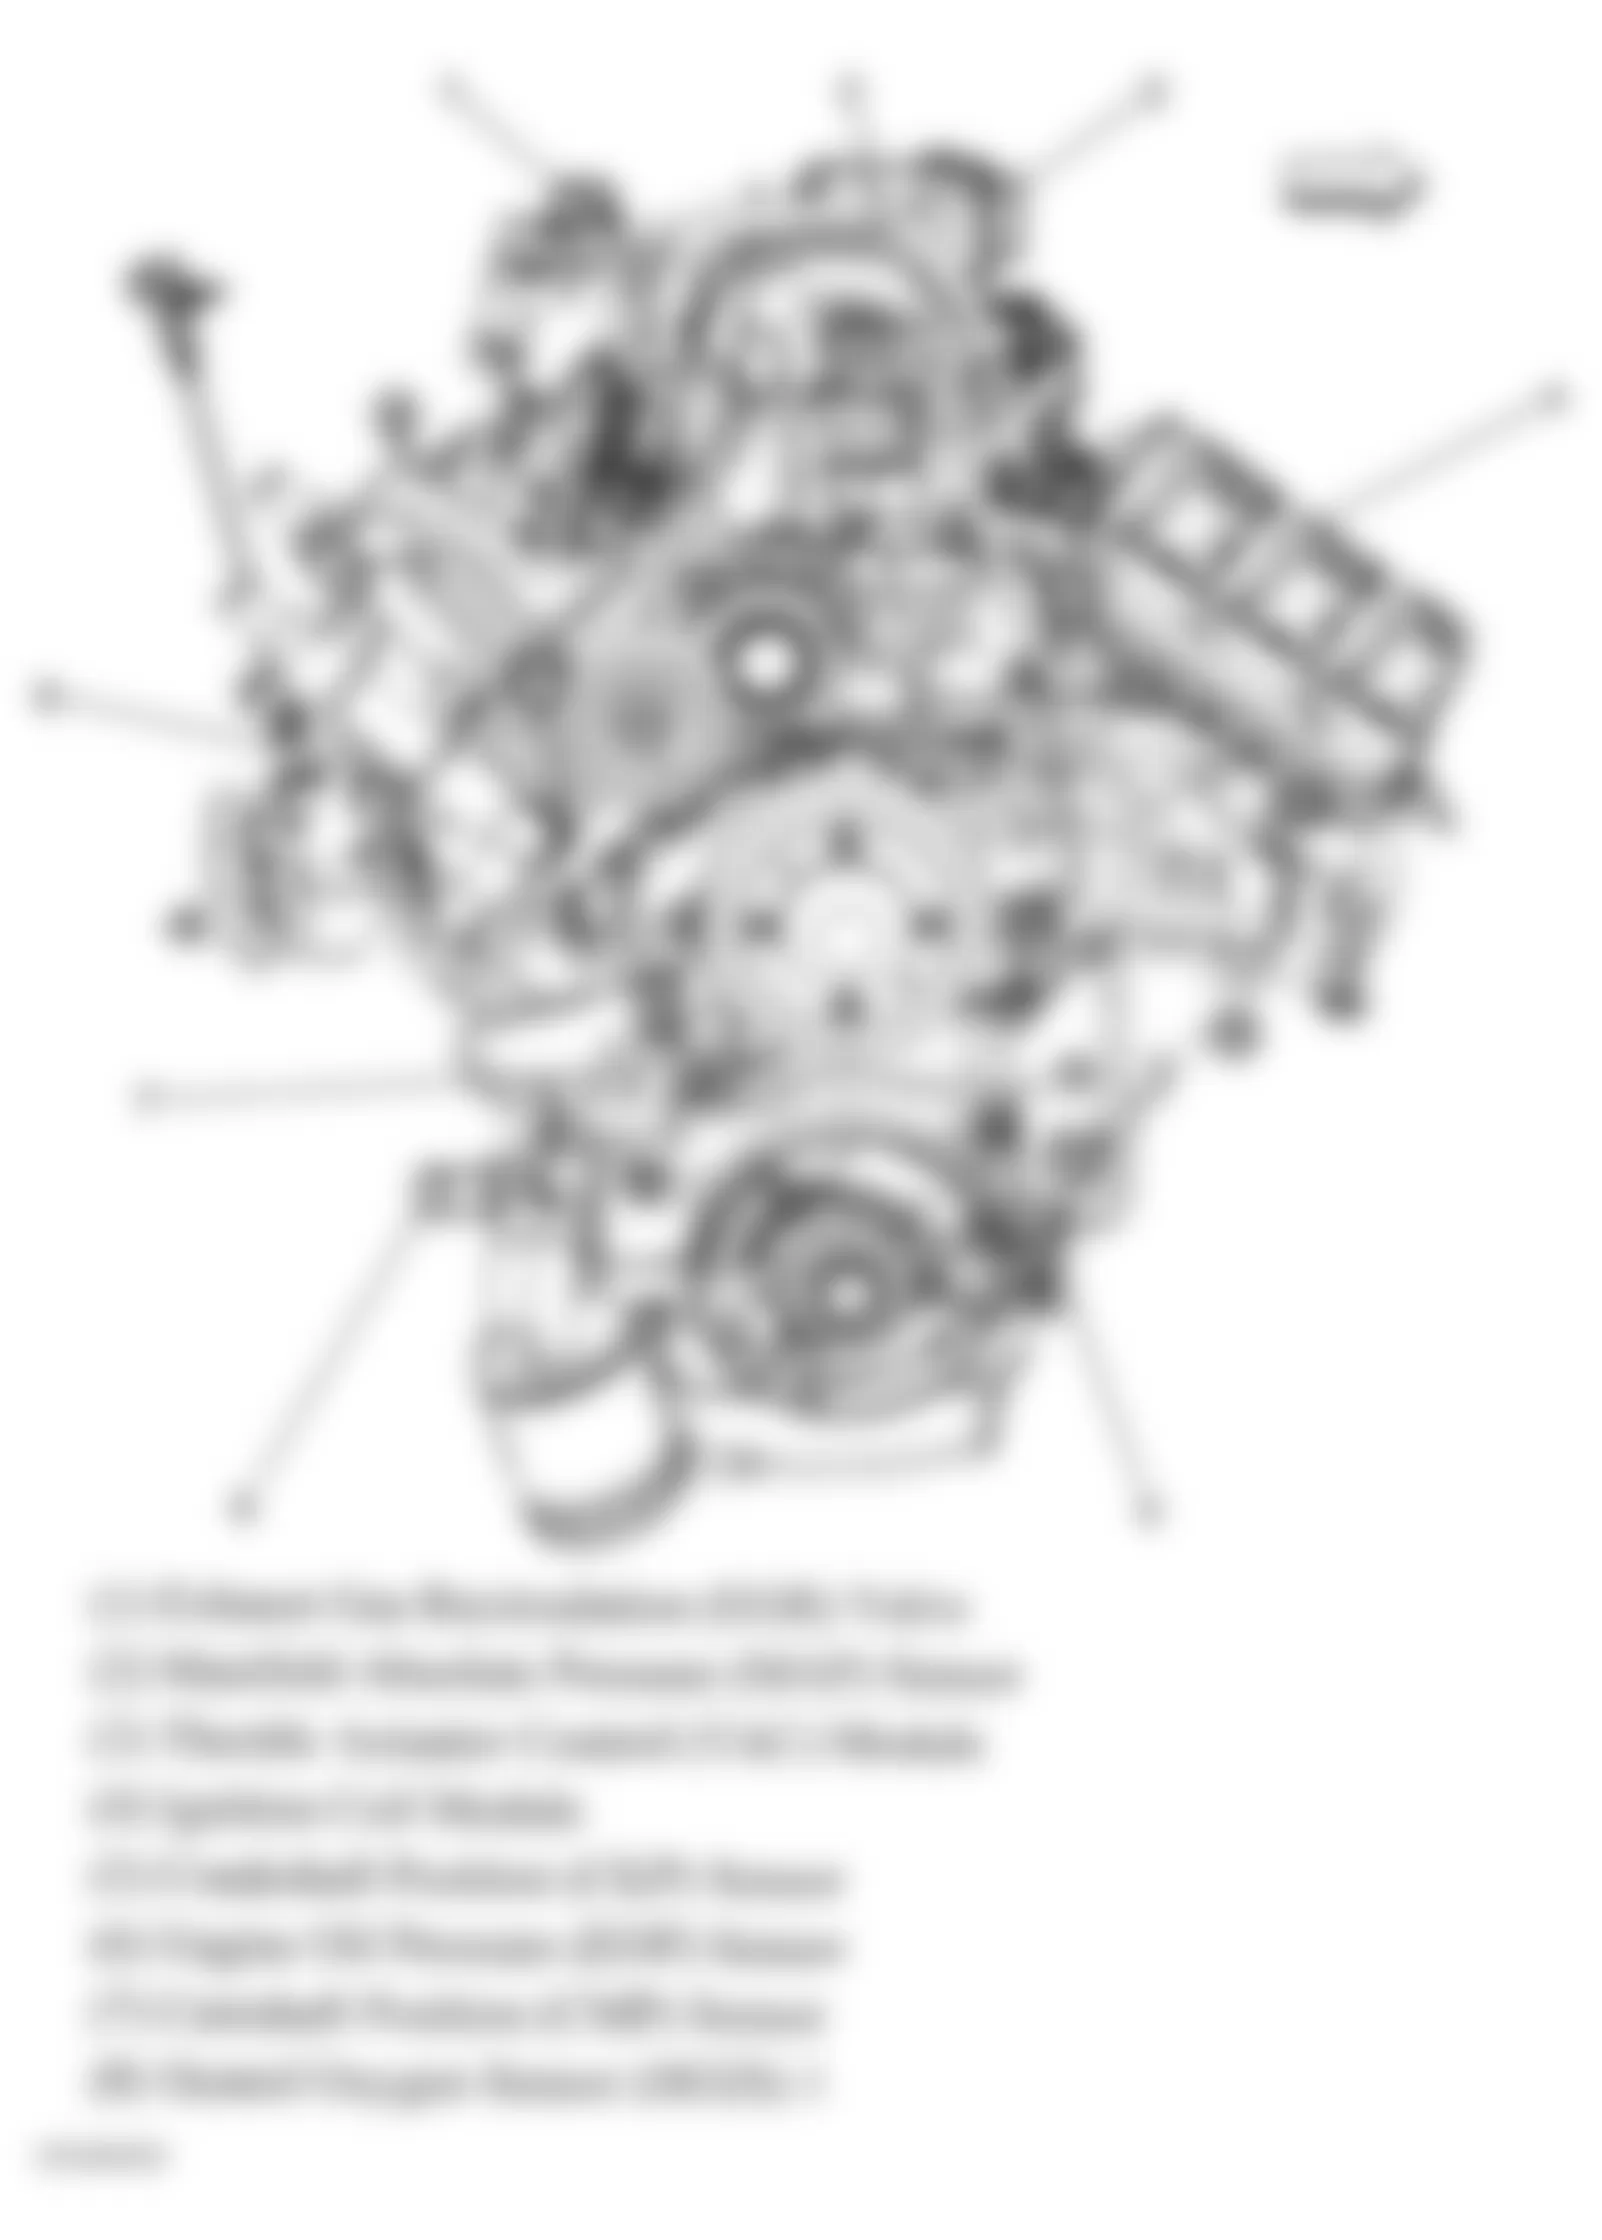 Buick LaCrosse CXL 2008 - Component Locations -  Front Of Engine (3.8L)